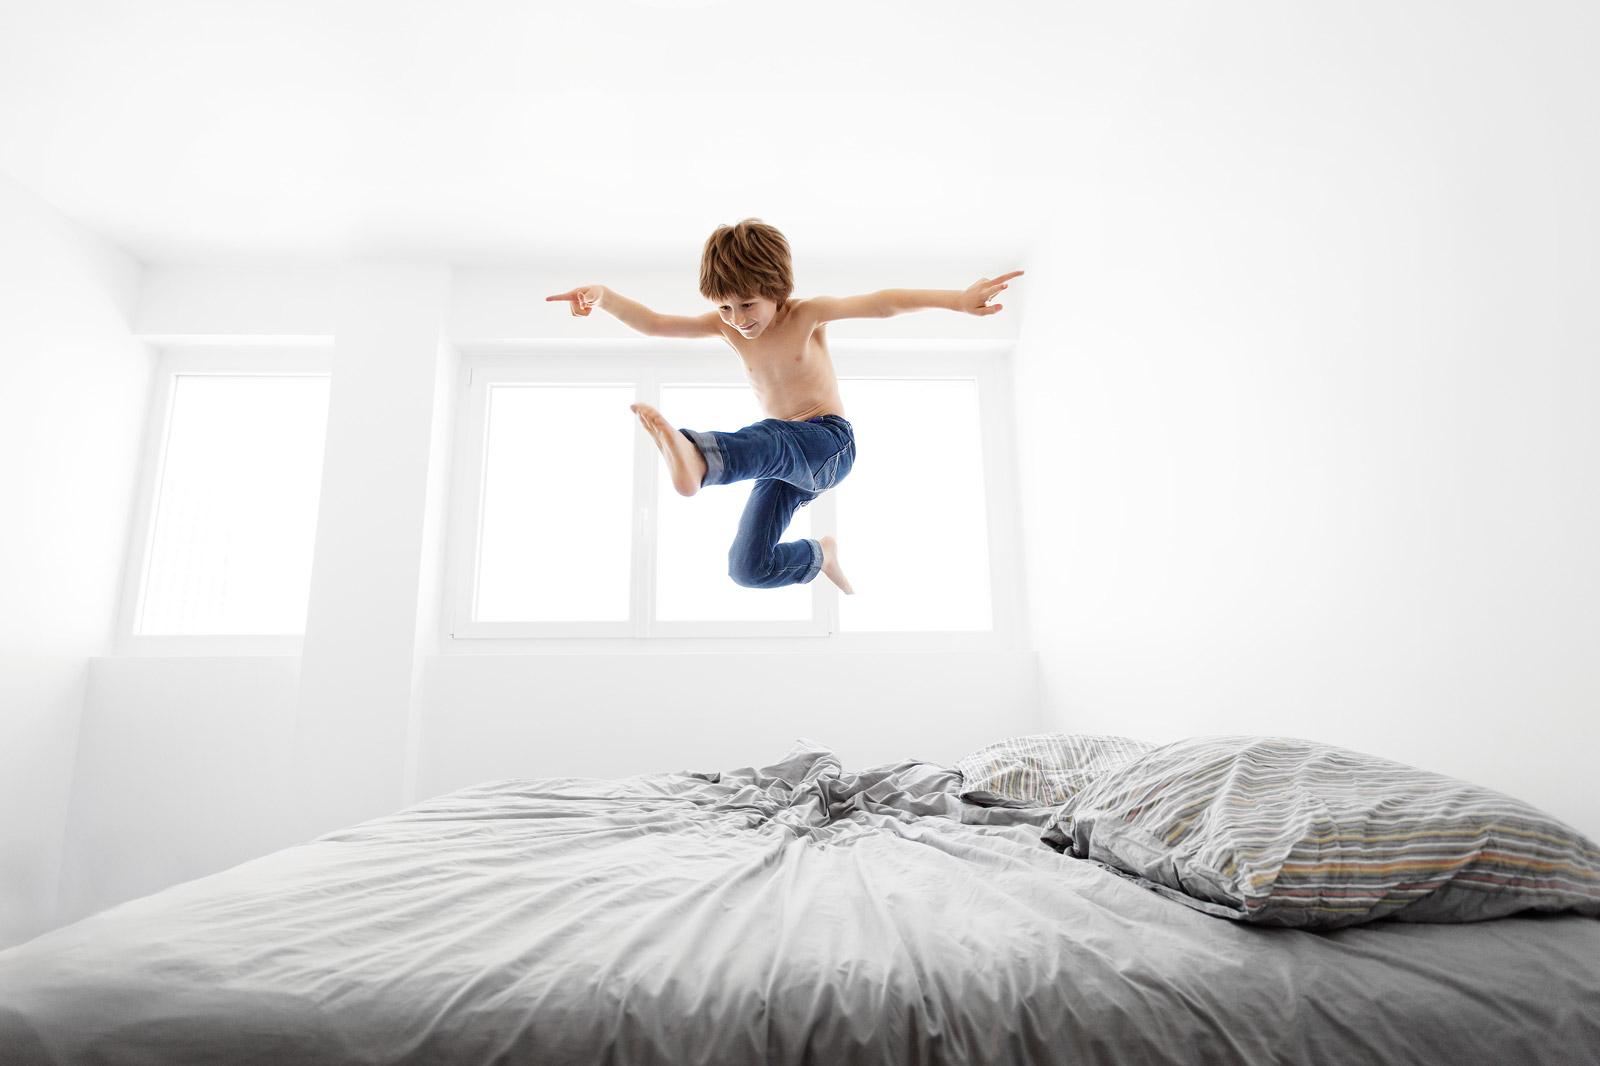 10 simple tips for photographing your child jumping on the bed